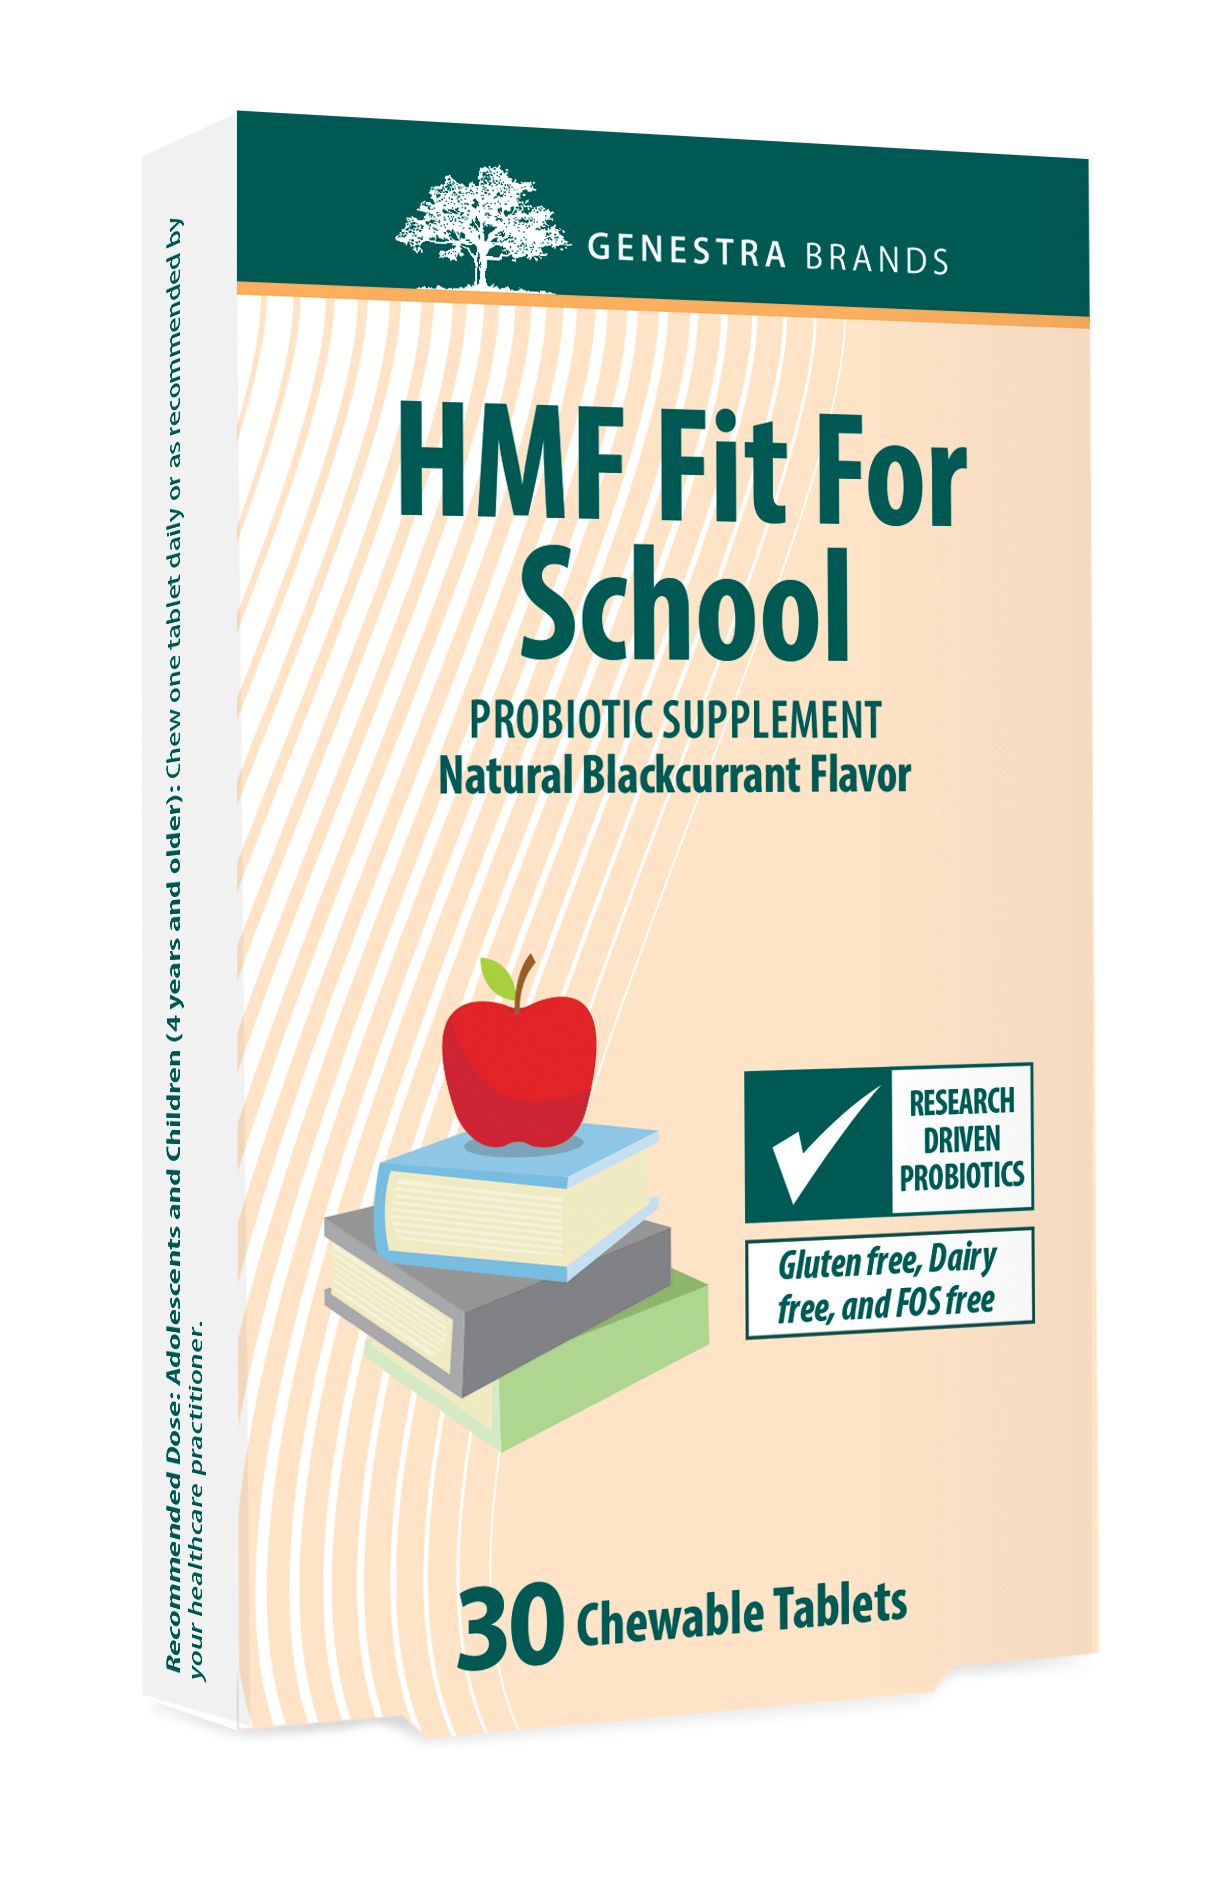 HMF Fit for School - USA only